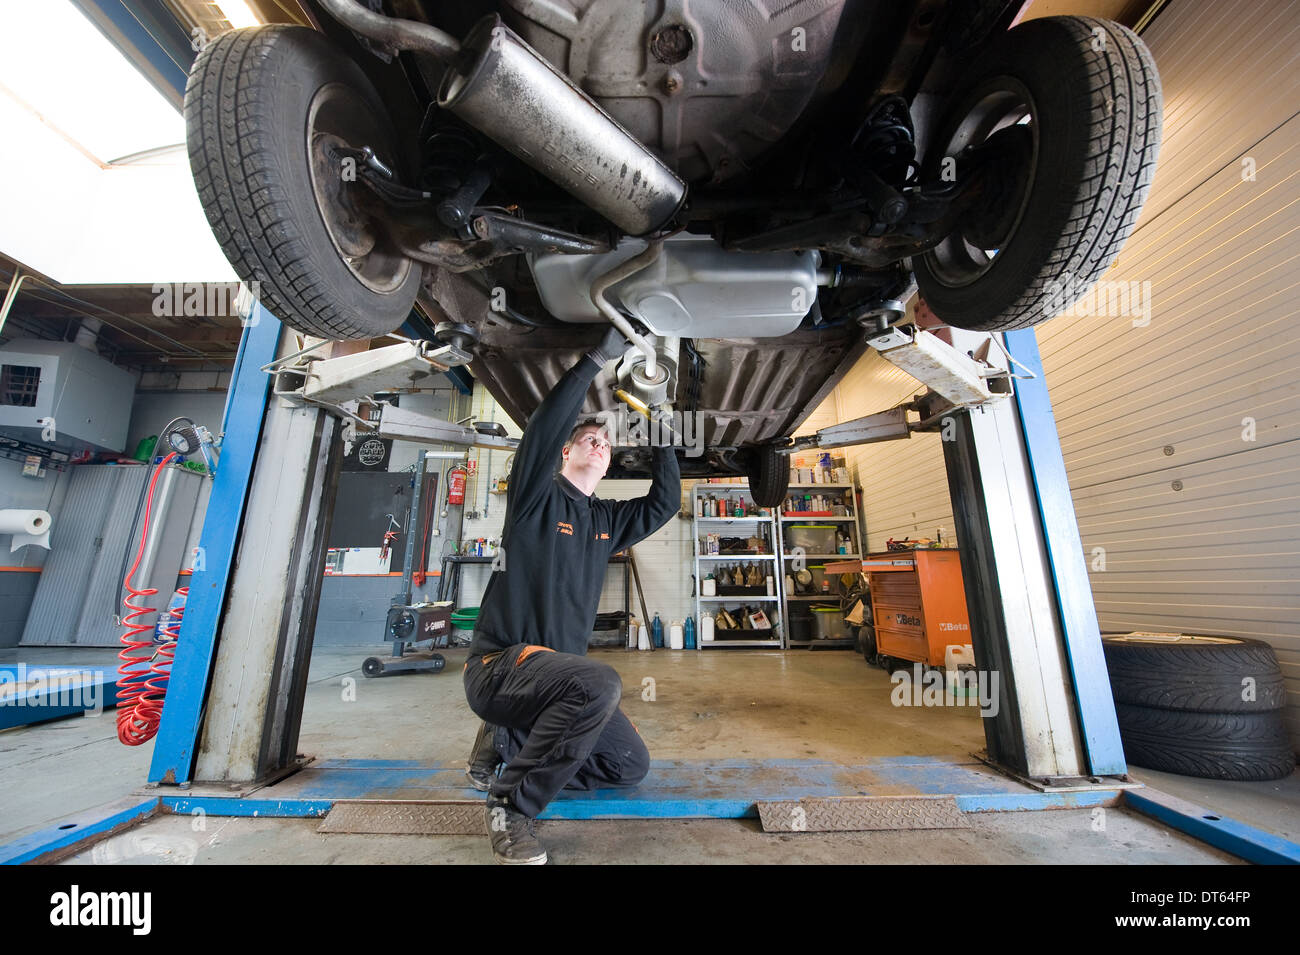 A mechanic is working on a car in a garage Stock Photo